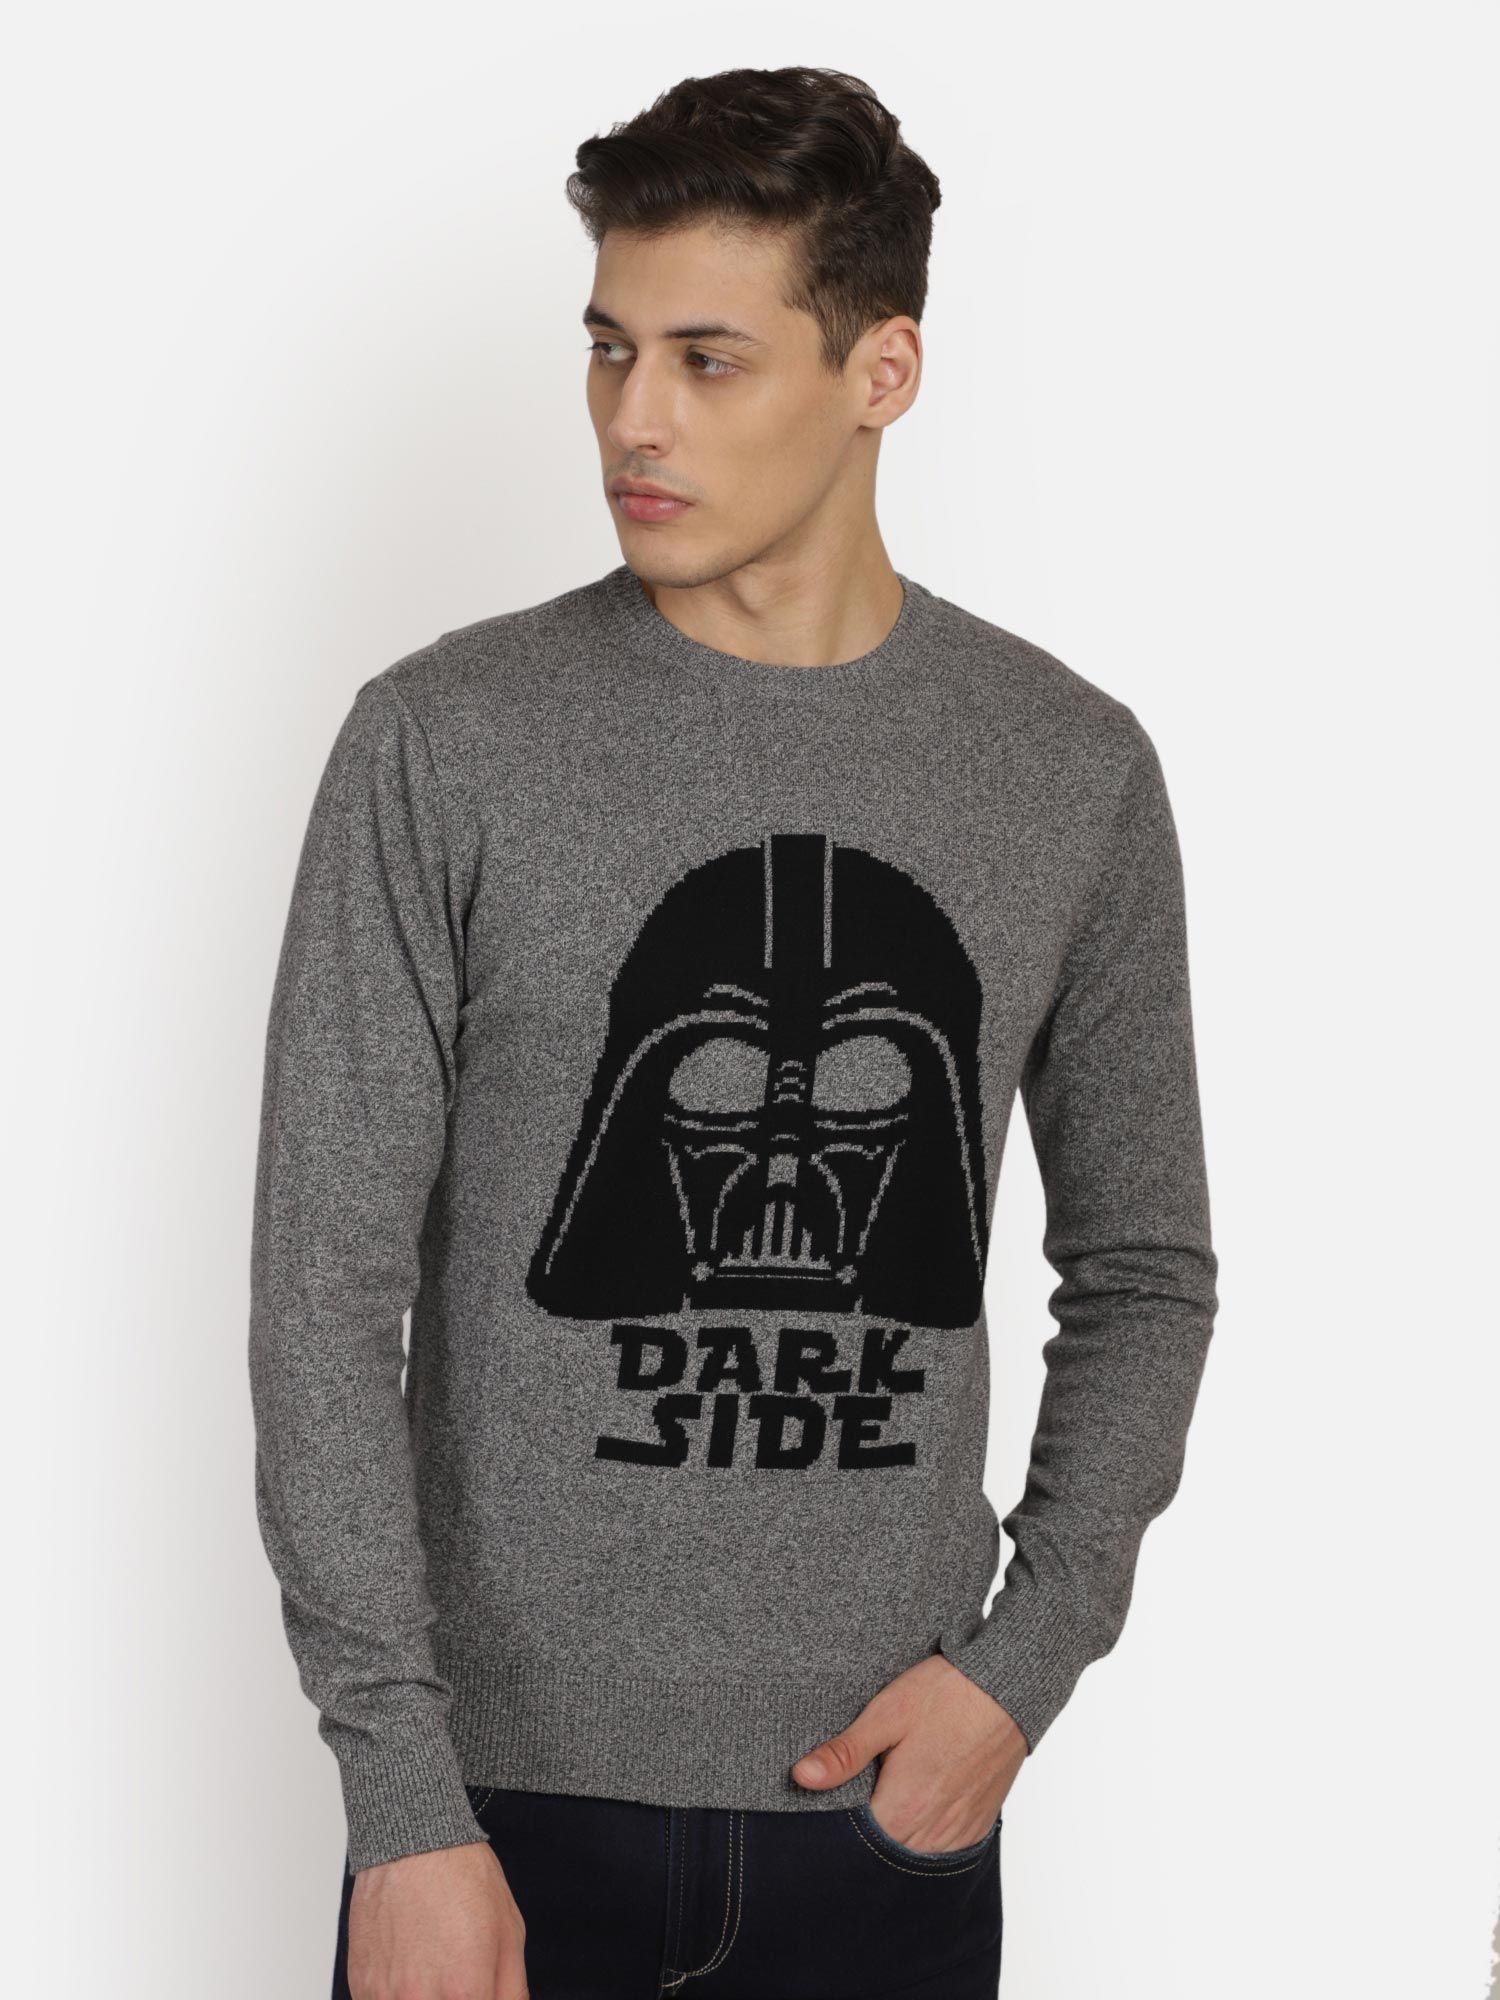 star wars featured grey sweater for men